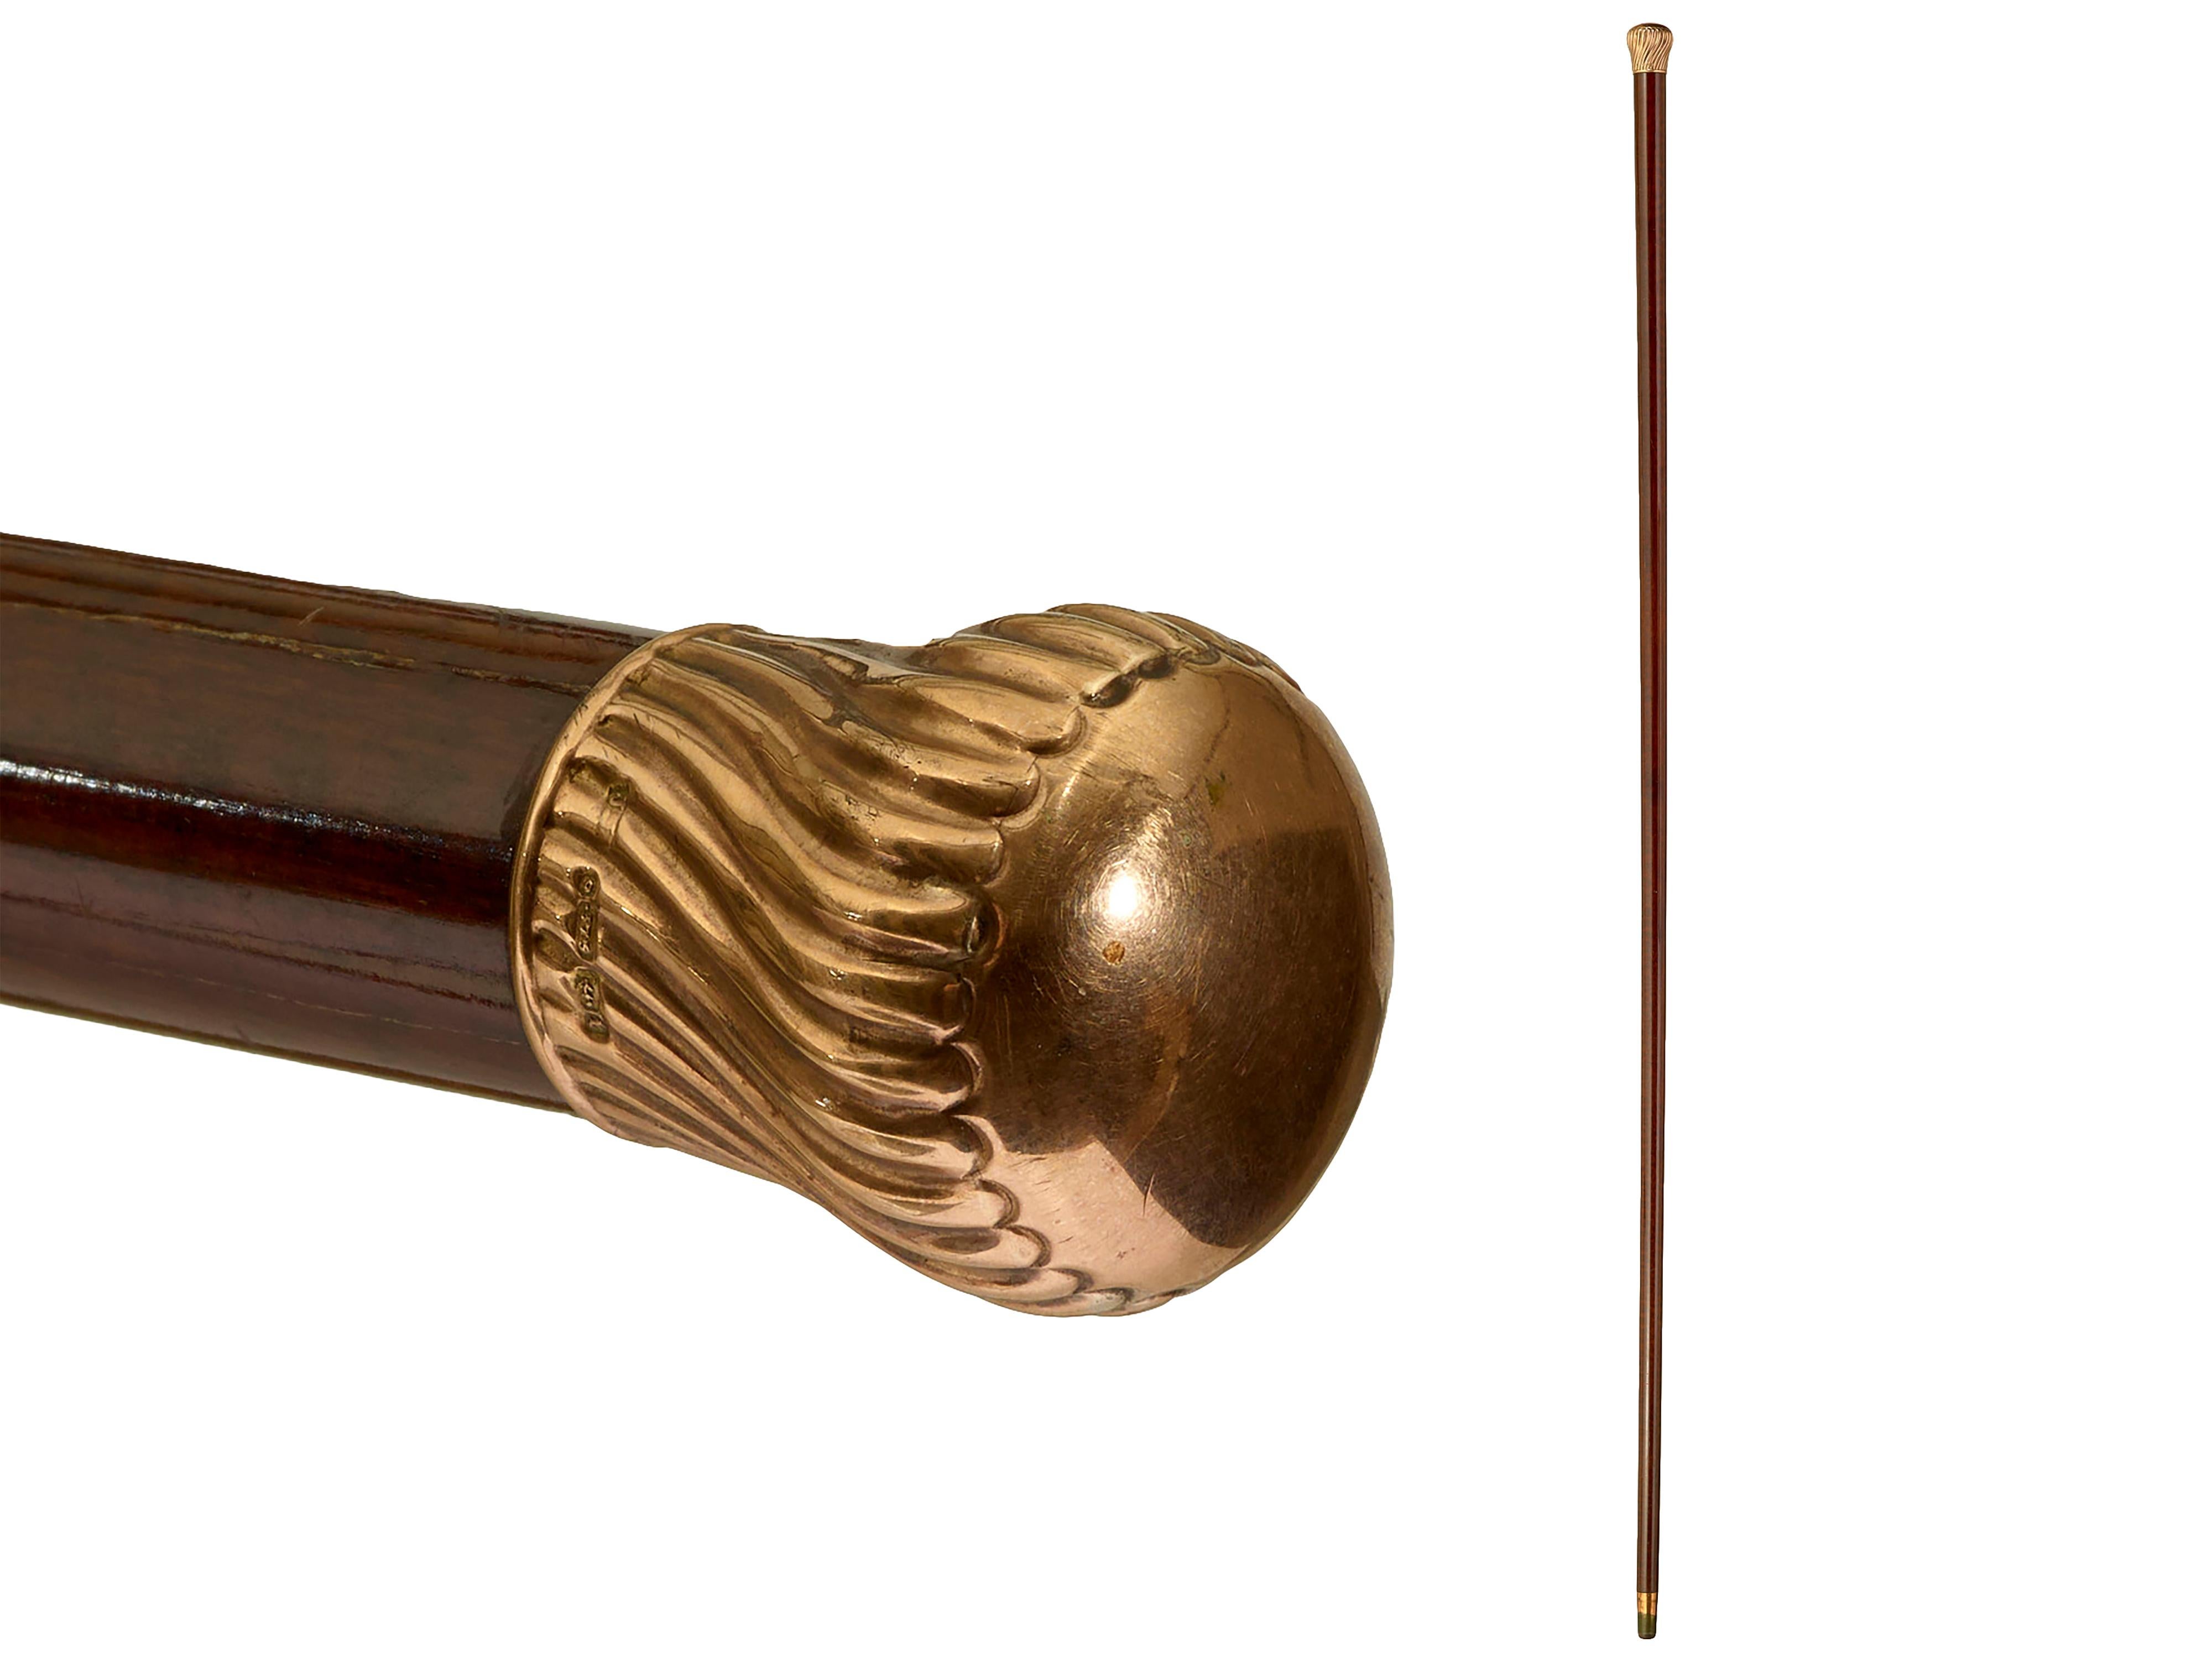 Gold mounted walking cane
9 ct marked gold topped cane in good condition on snakewood shaft. Original ferrule.L 92cm, round top 3cm dia. Circa 1900. English.